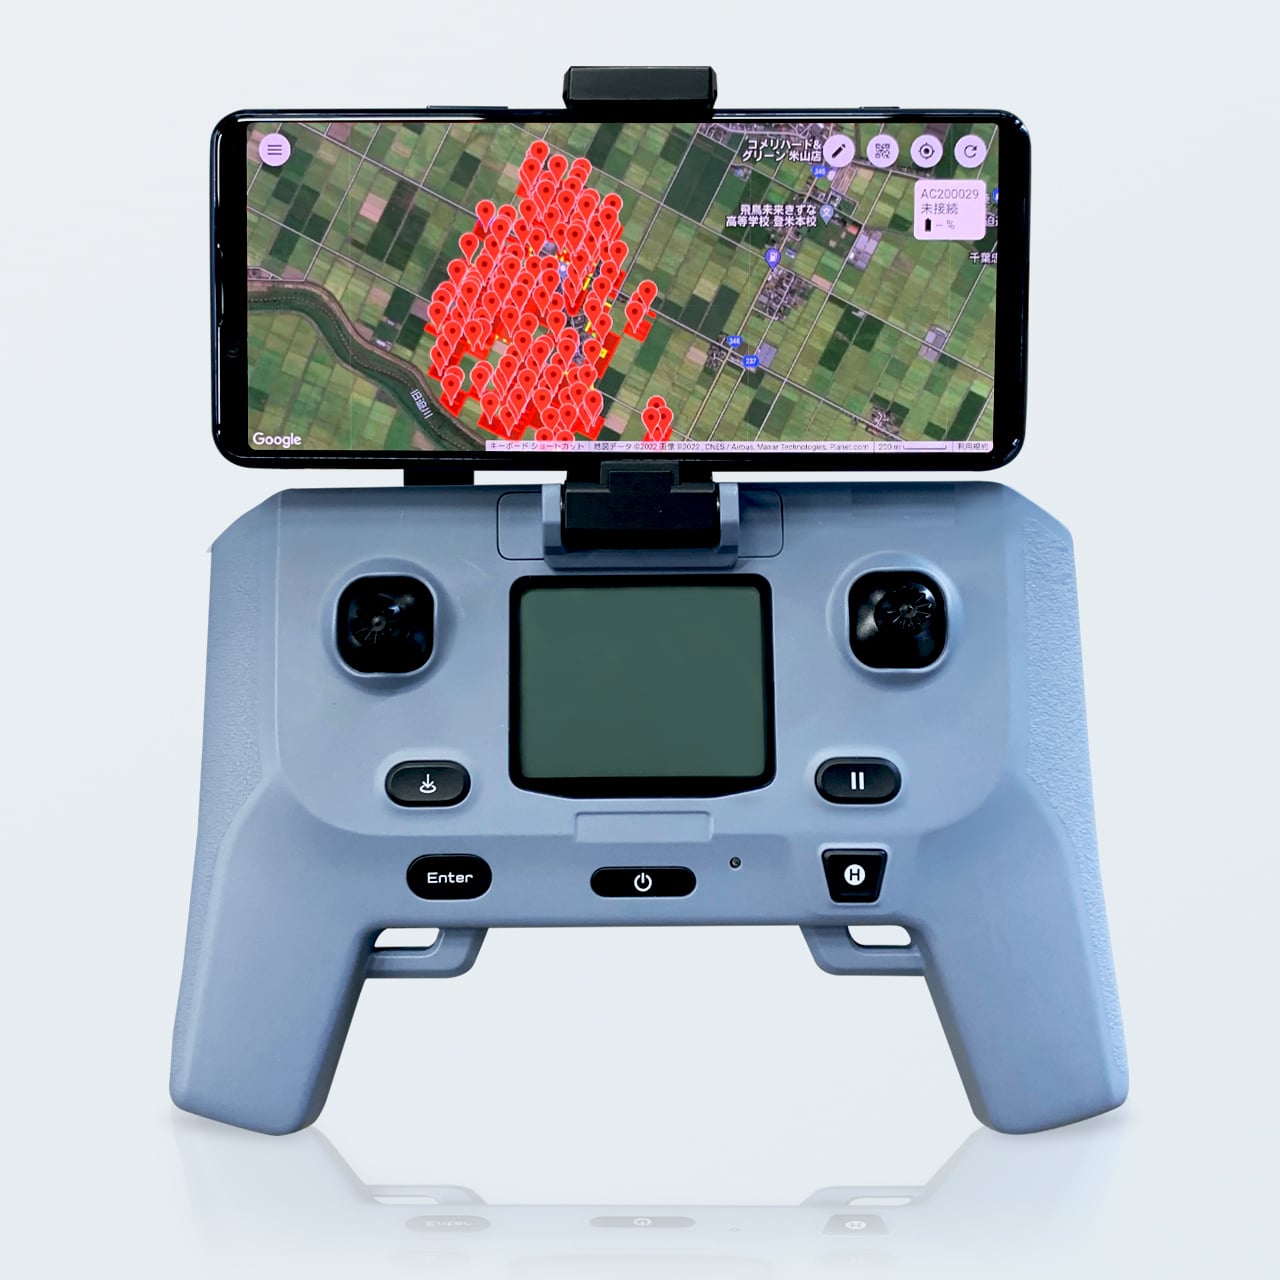 Nileworks controller example